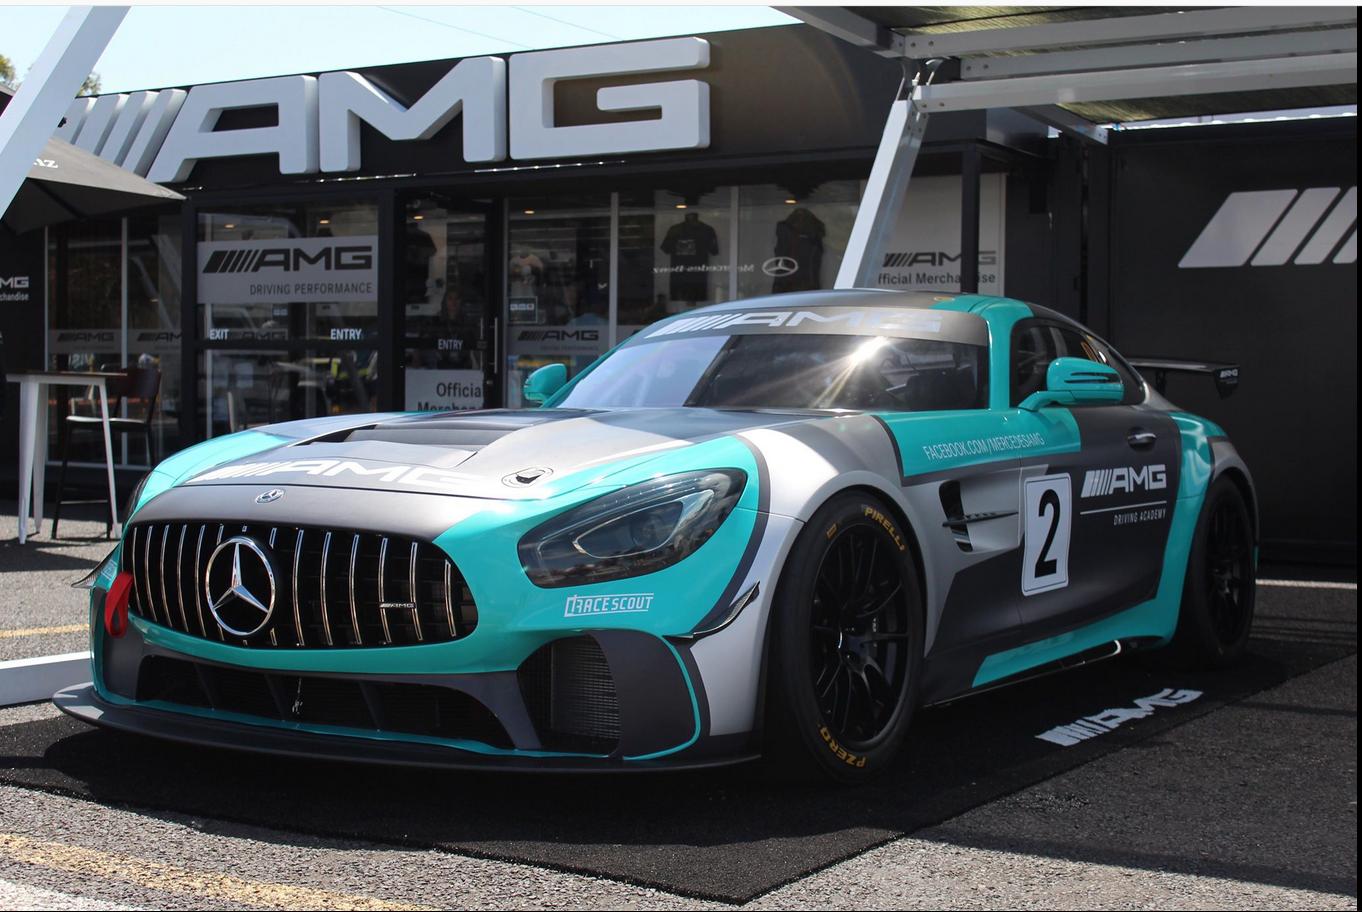 Preview of 2019 Factory Mercedes-AMG GT4 World Release Car by Scott S.